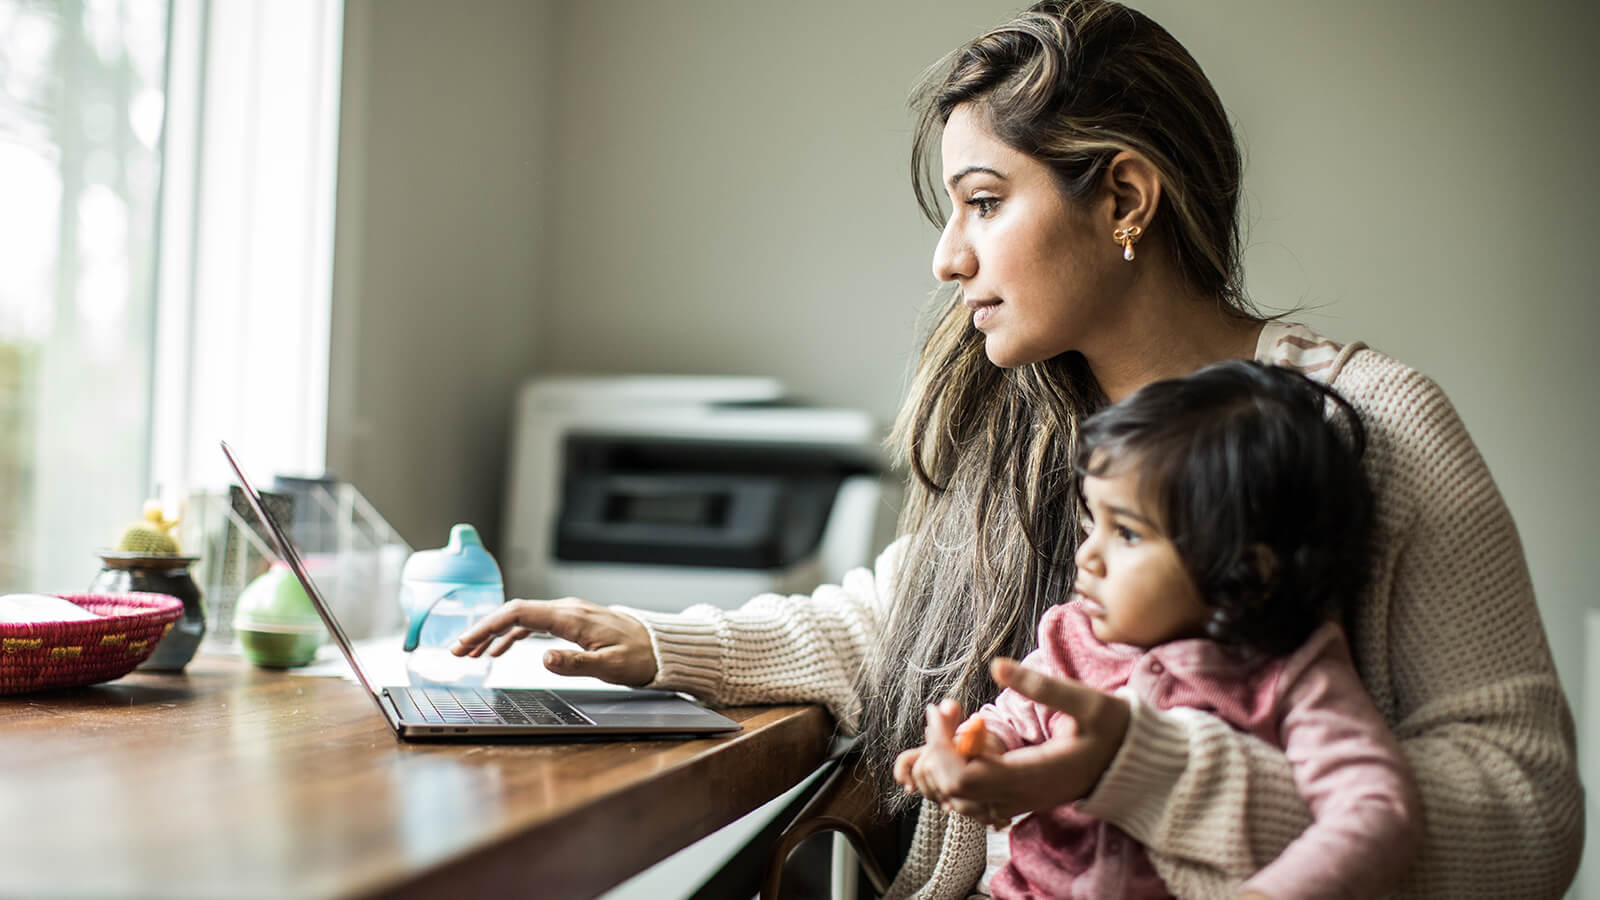 A woman works on her laptop while holding her child